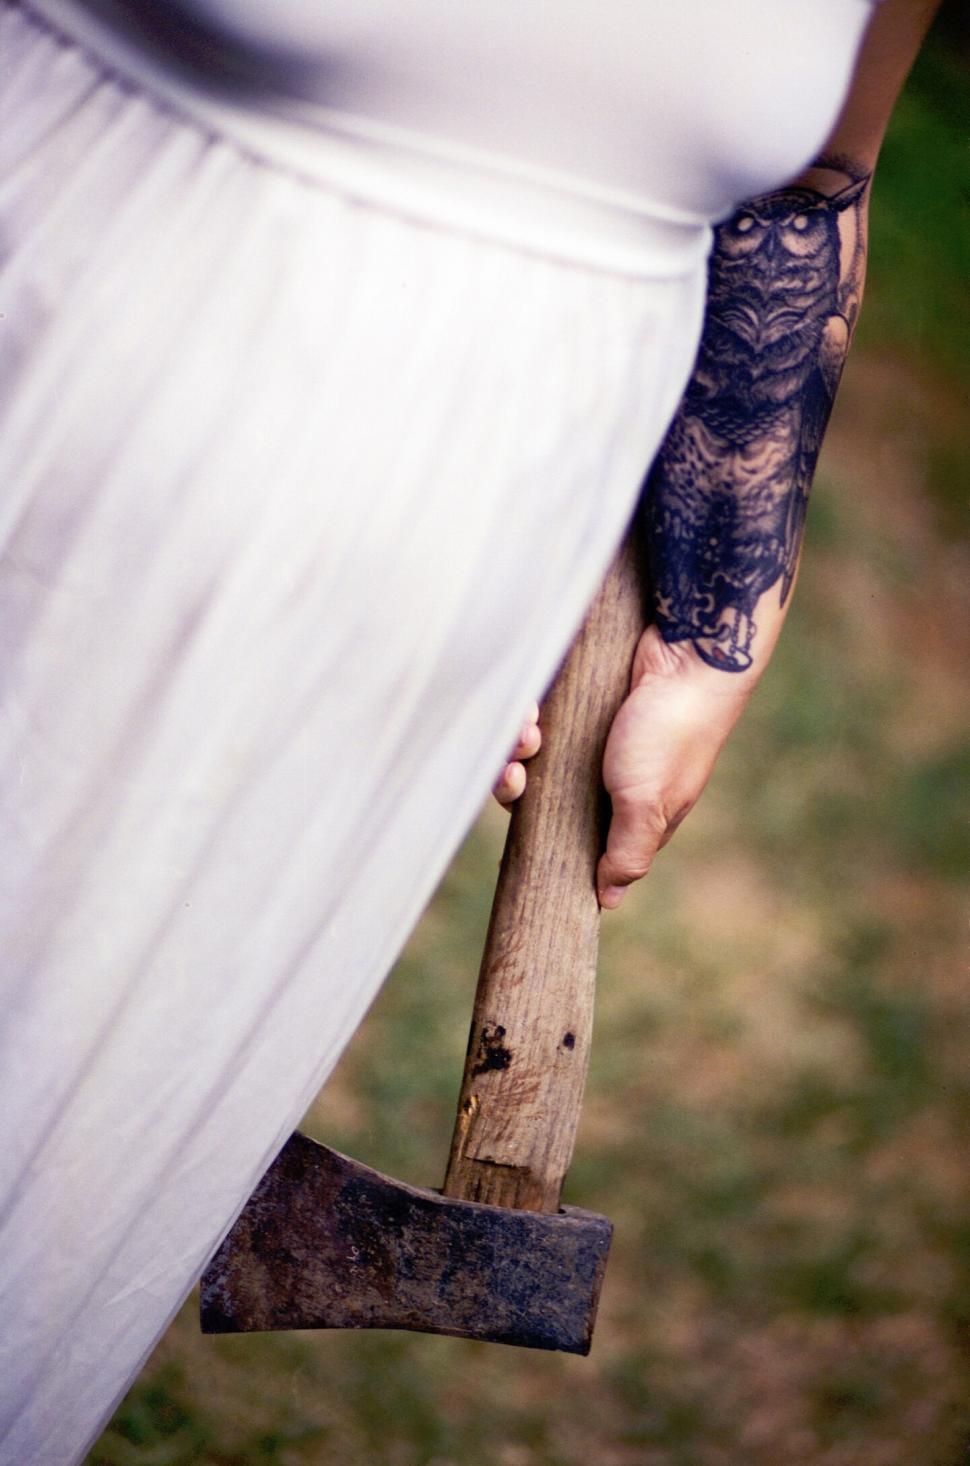 Free Image of Tattooed hand holding an axe by a white dress 